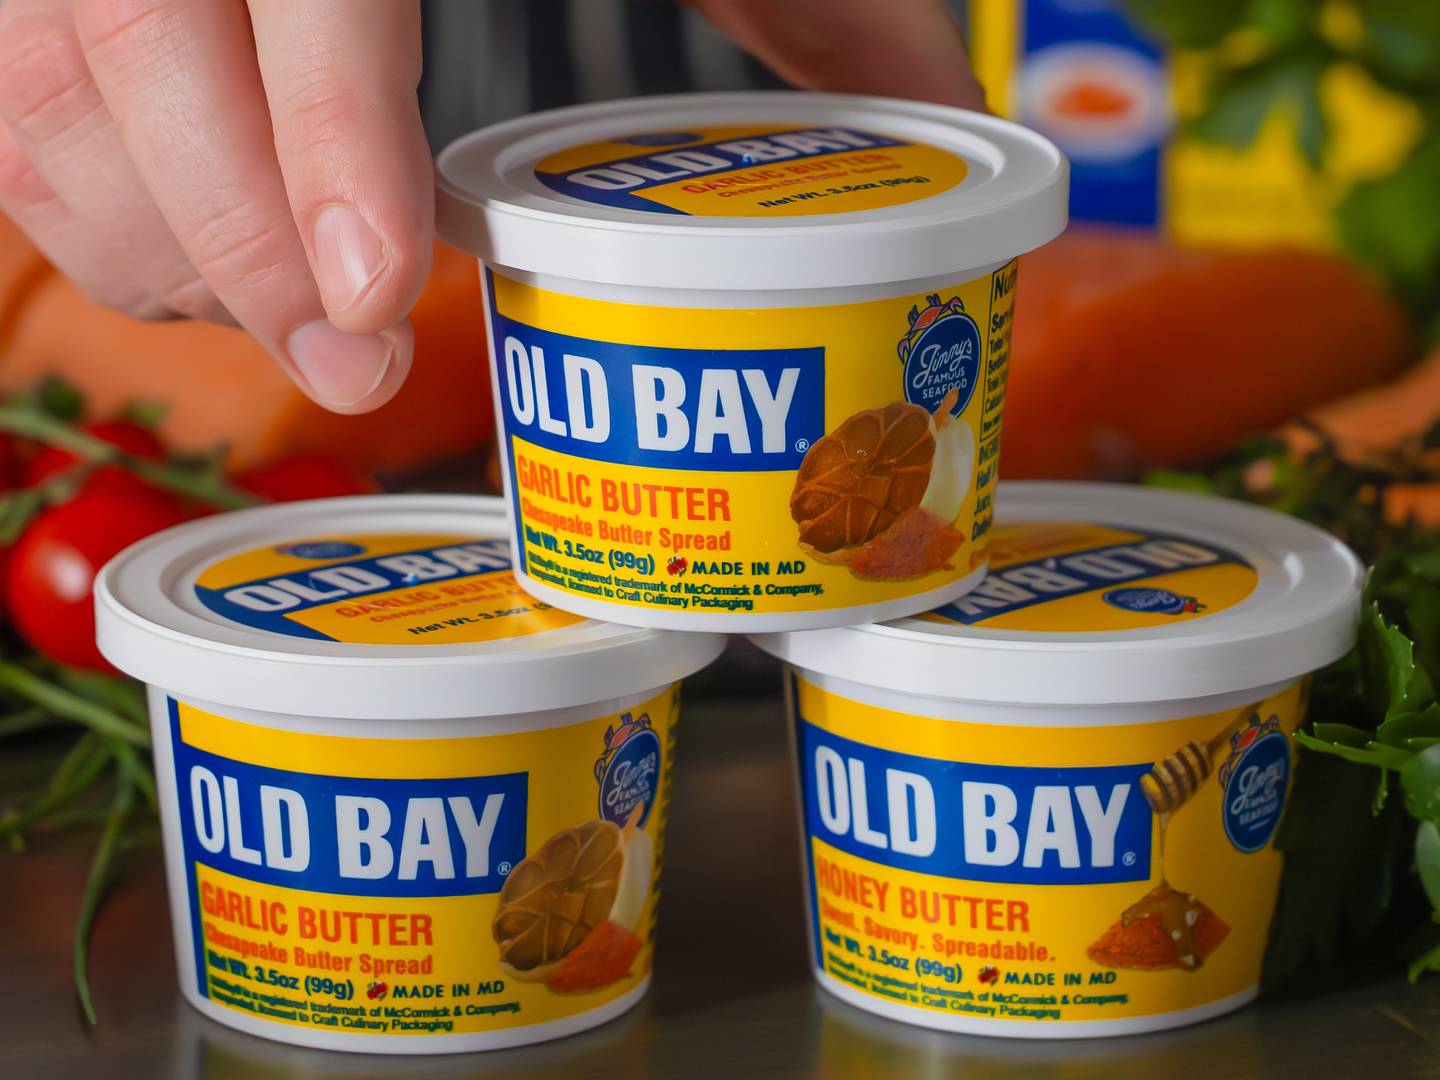 Jimmy's Famous Seafood has teamed up with Old Bay seasoning to provide sweet and savory butter spreads.